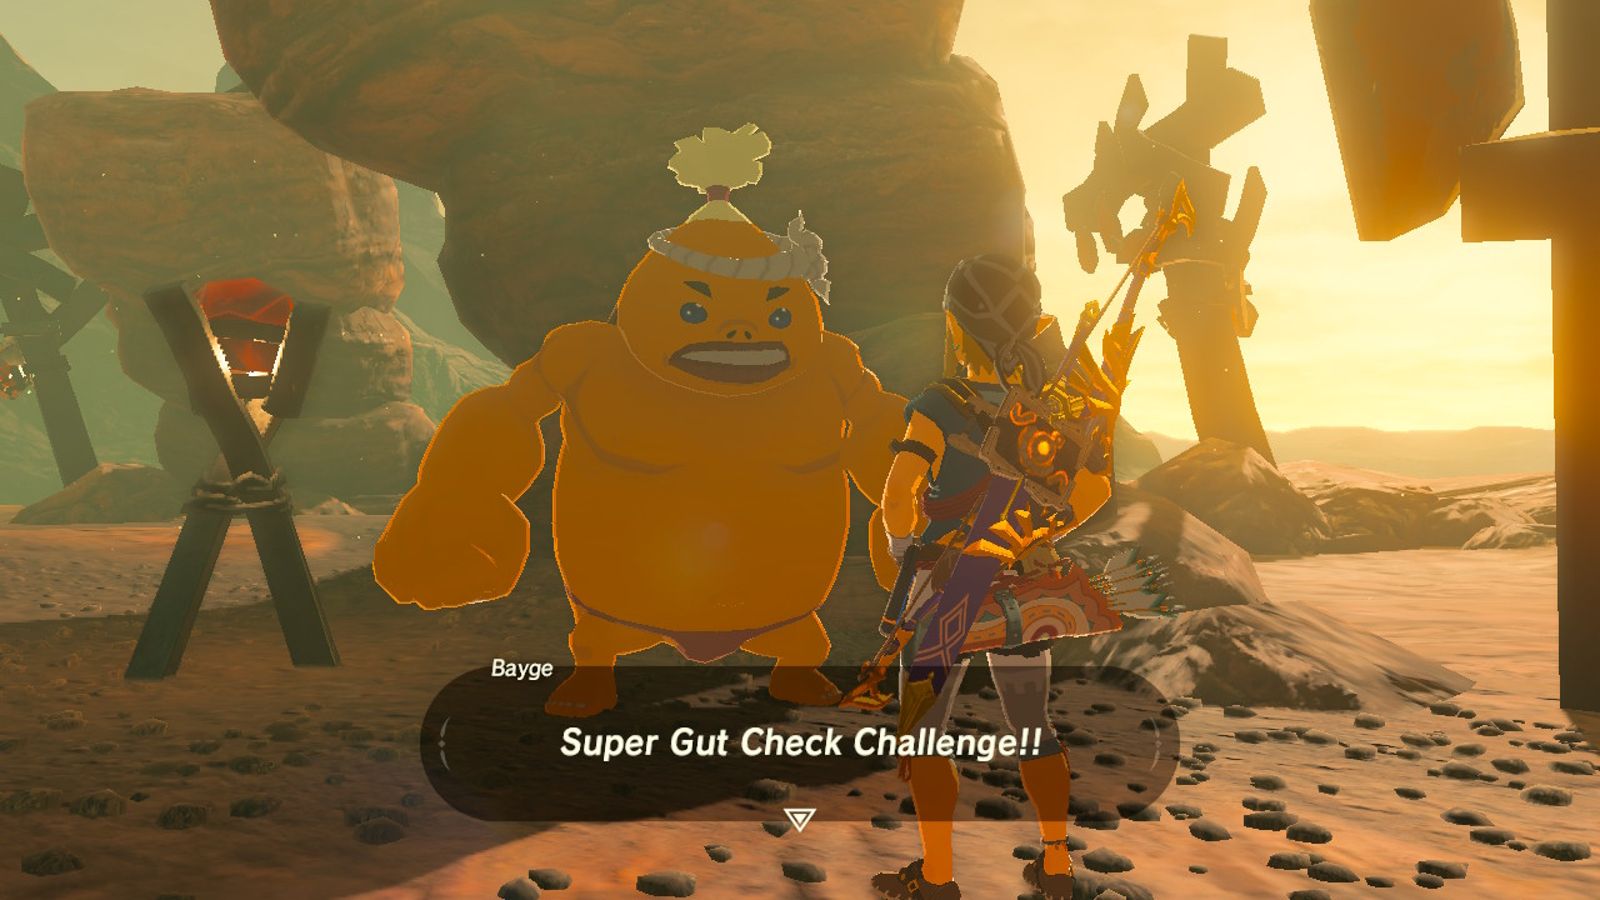 Players can earn as many Rupees as they can grab in BOTW's Super Gut Check Challenge.